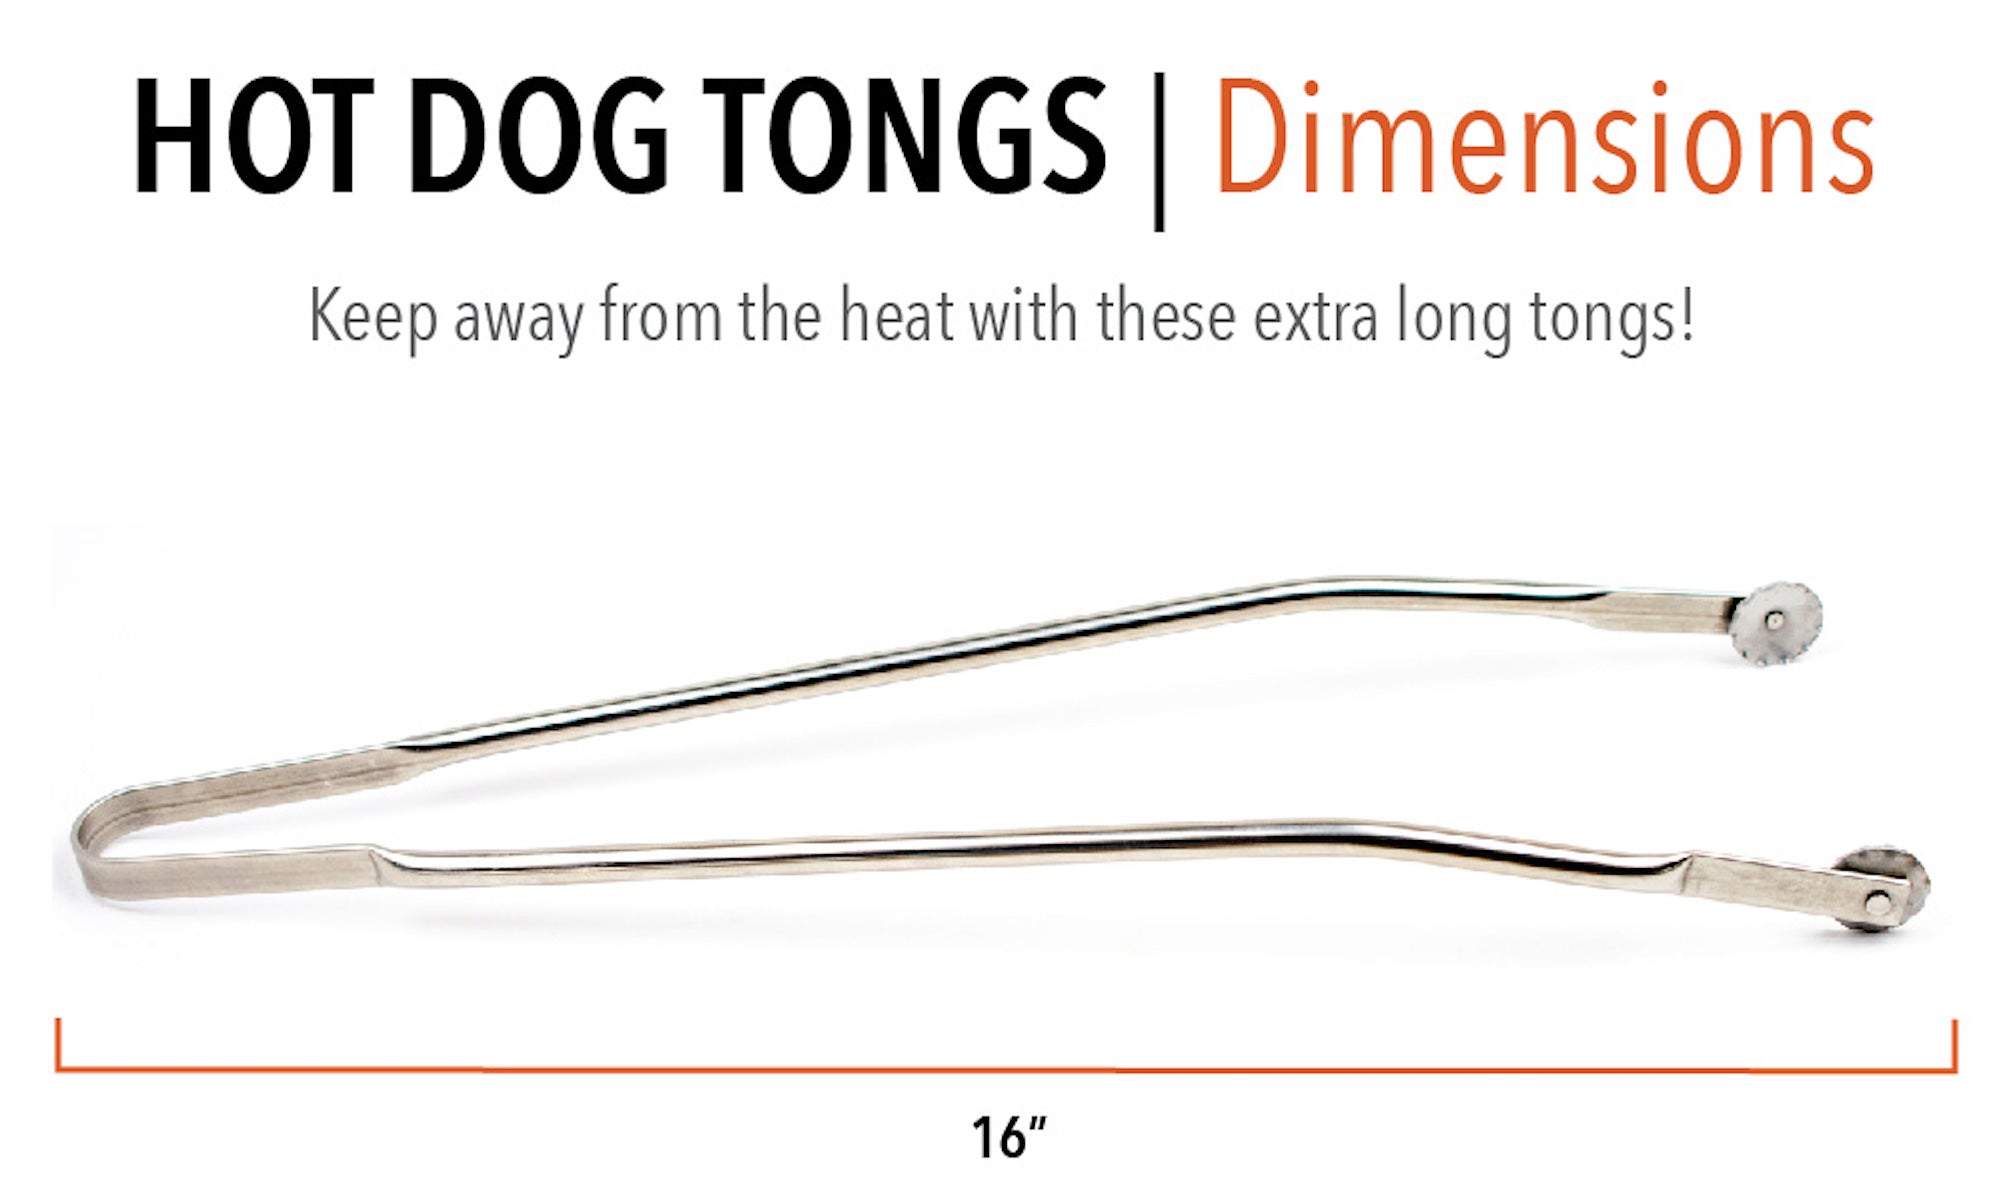 WOODHOT Stainless Steel BBQ Grill Tongs